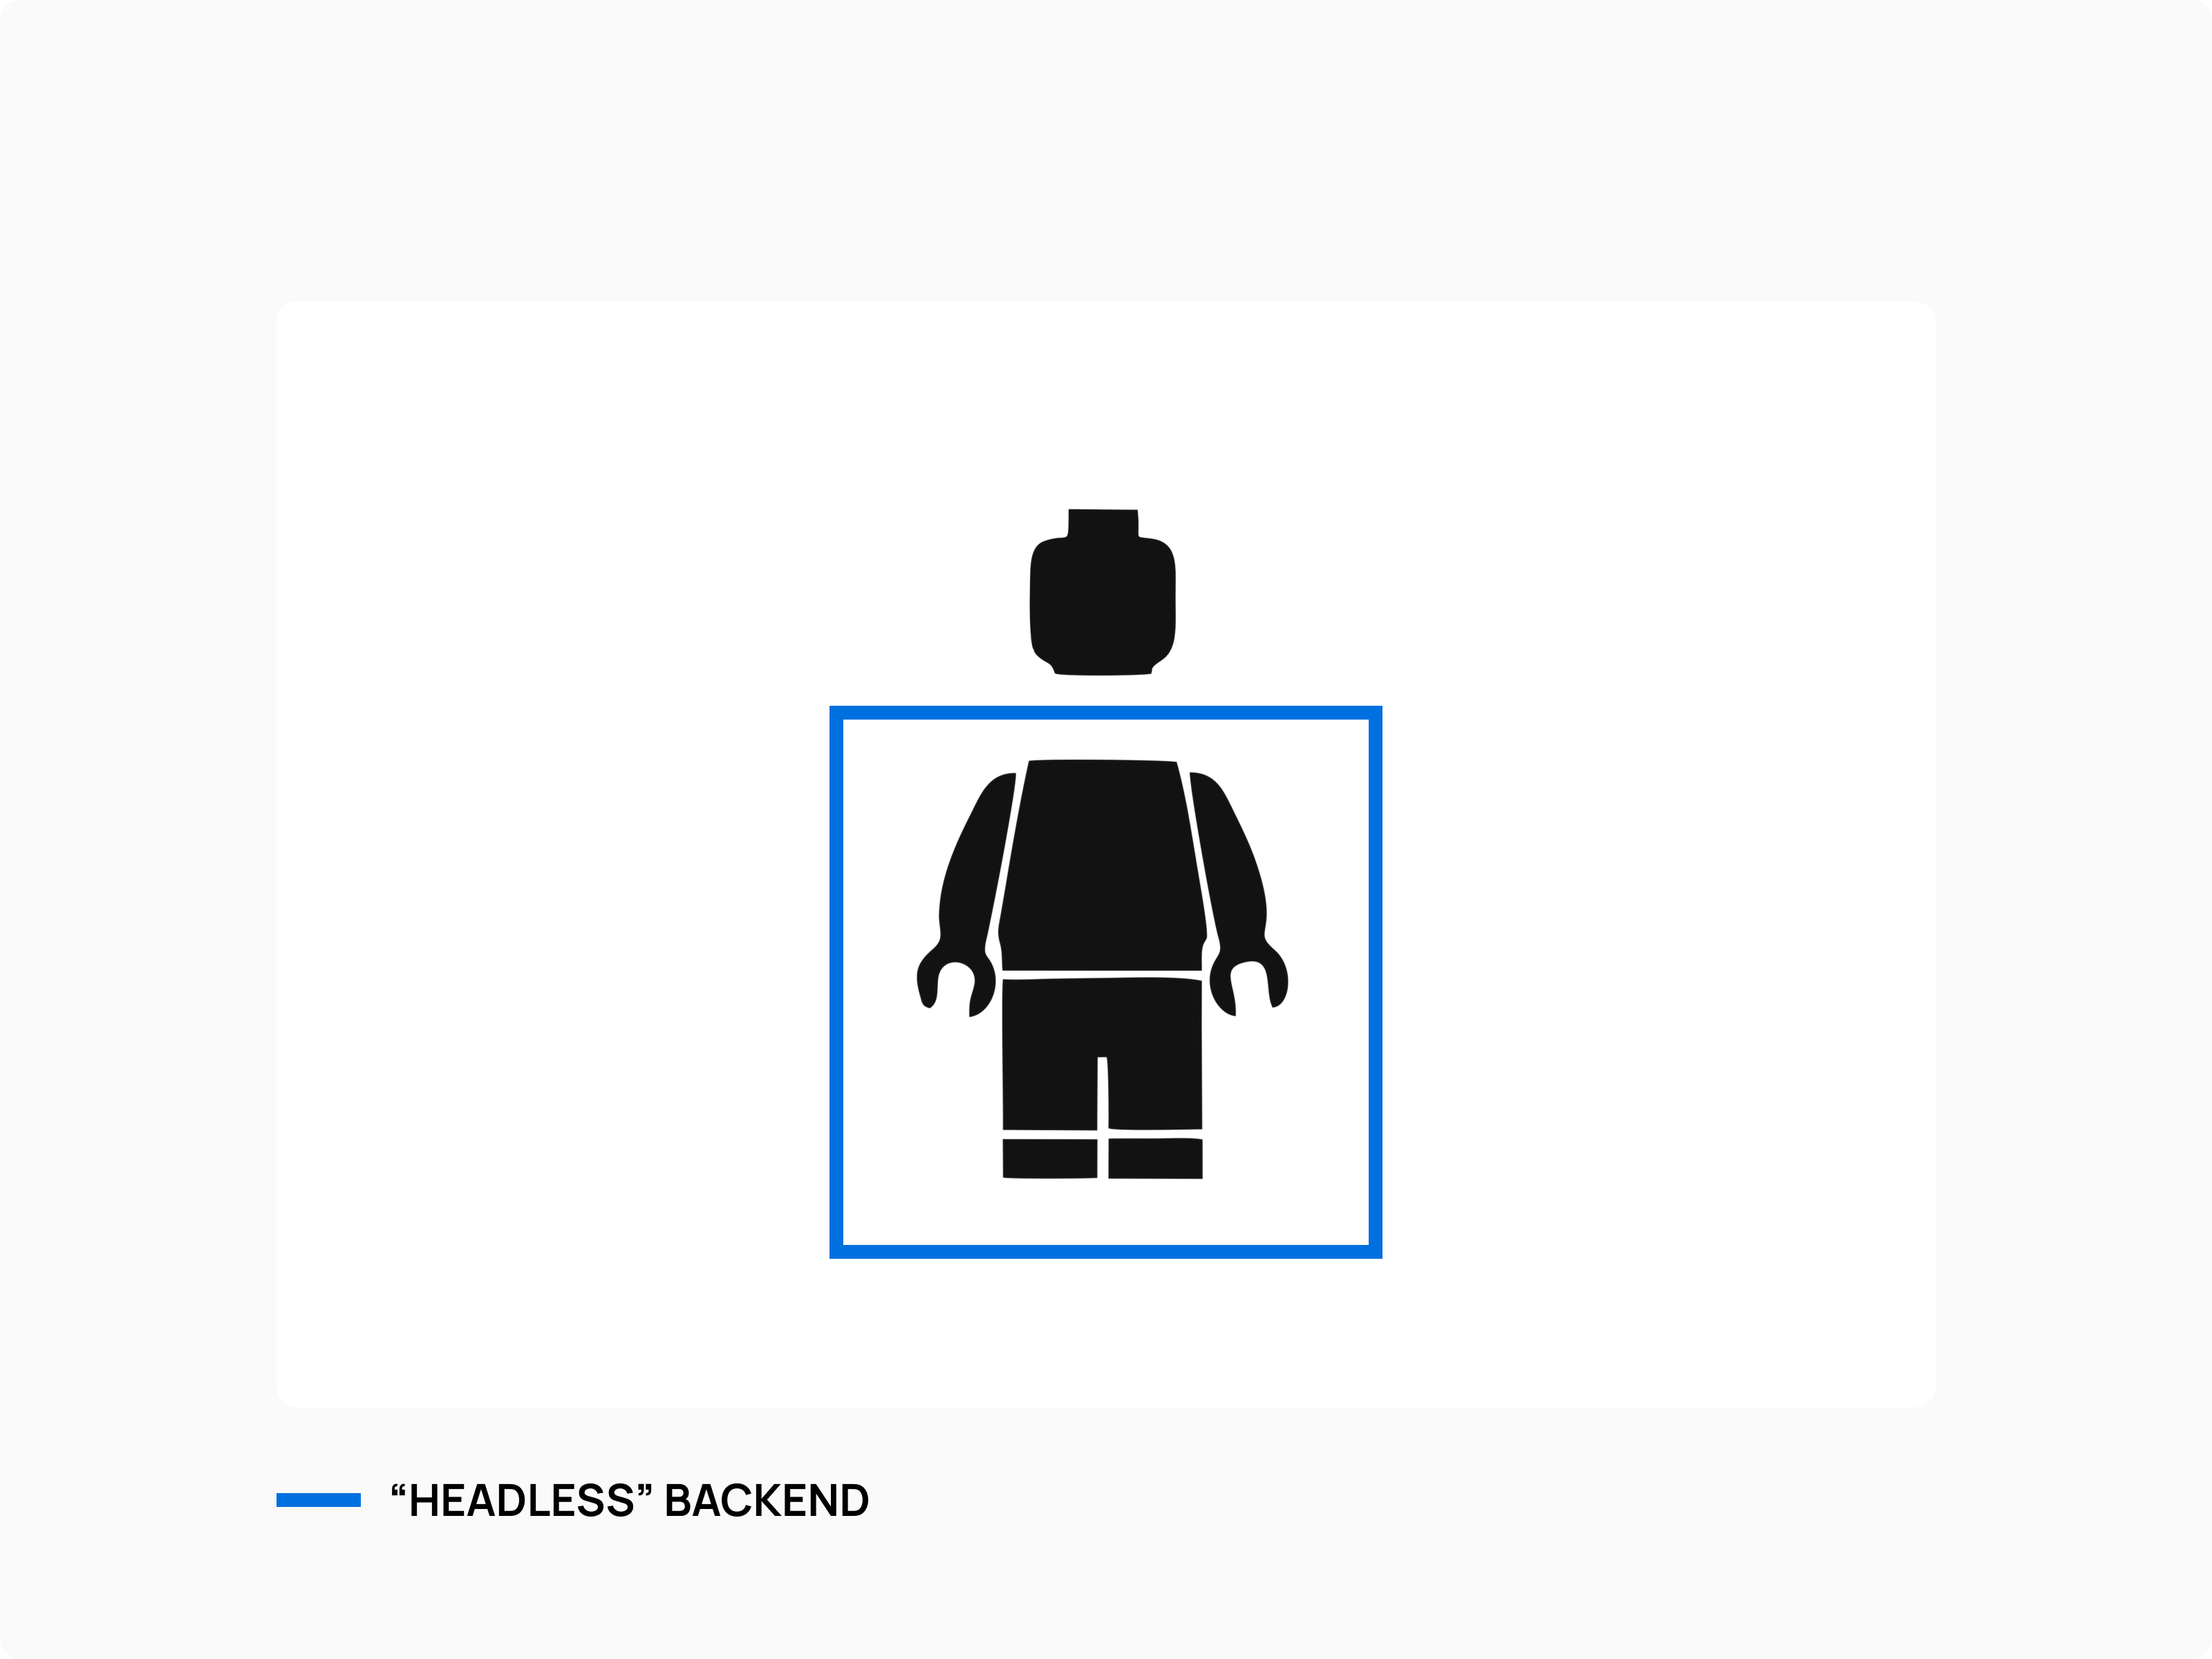 The body is the "headless" backend.